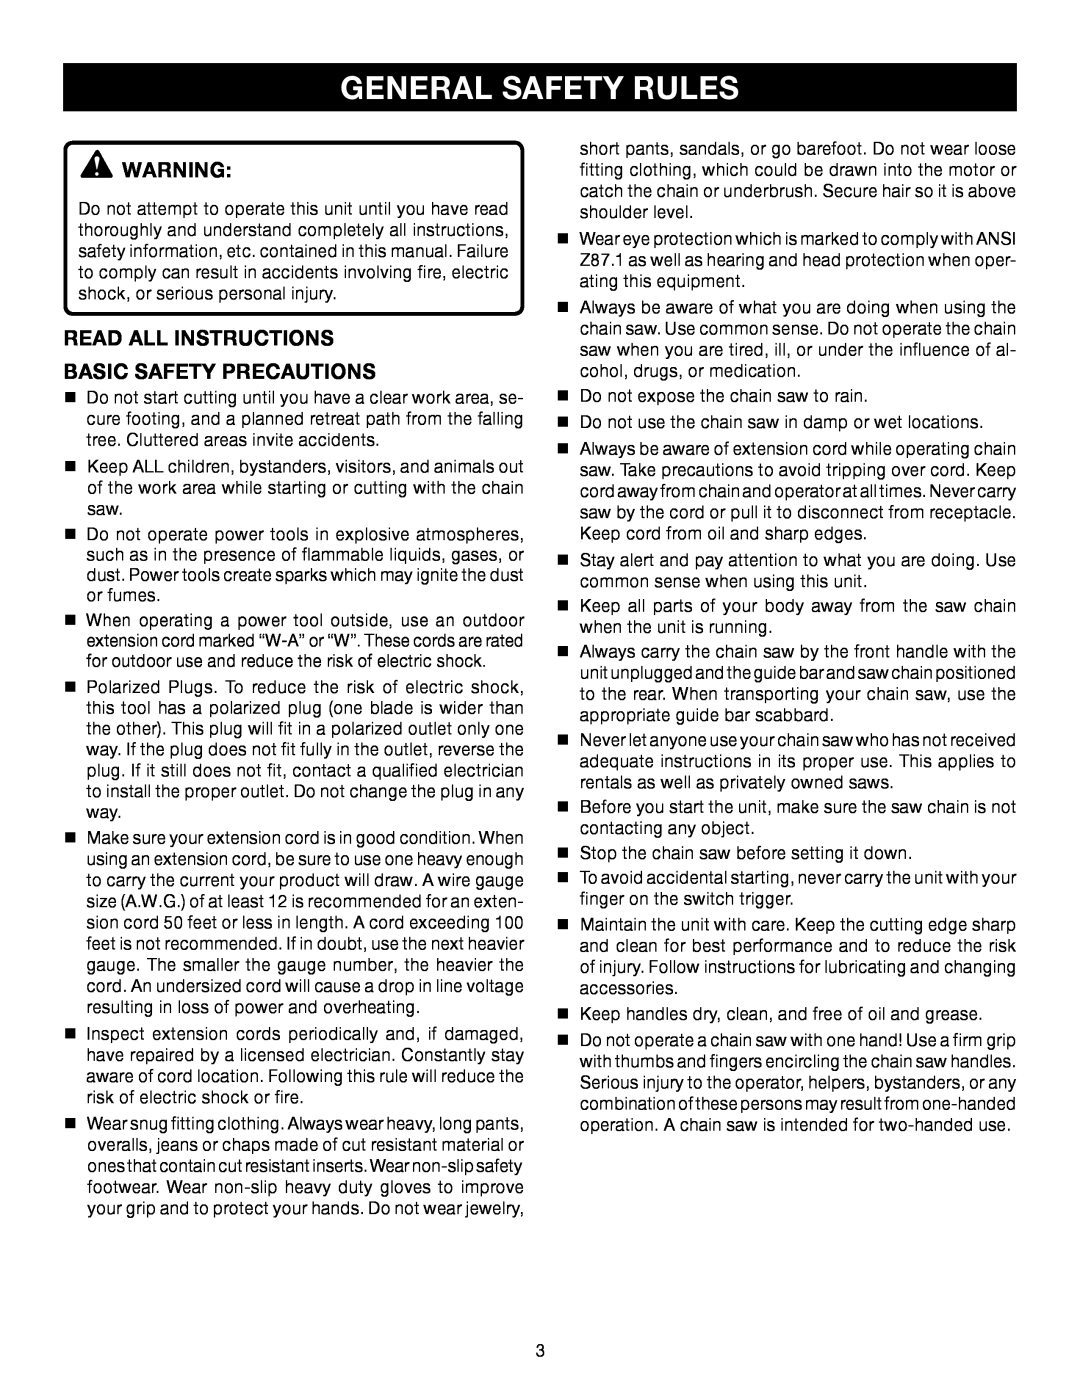 Ryobi RY43006 manual General Safety Rules, Read All Instructions Basic Safety Precautions 